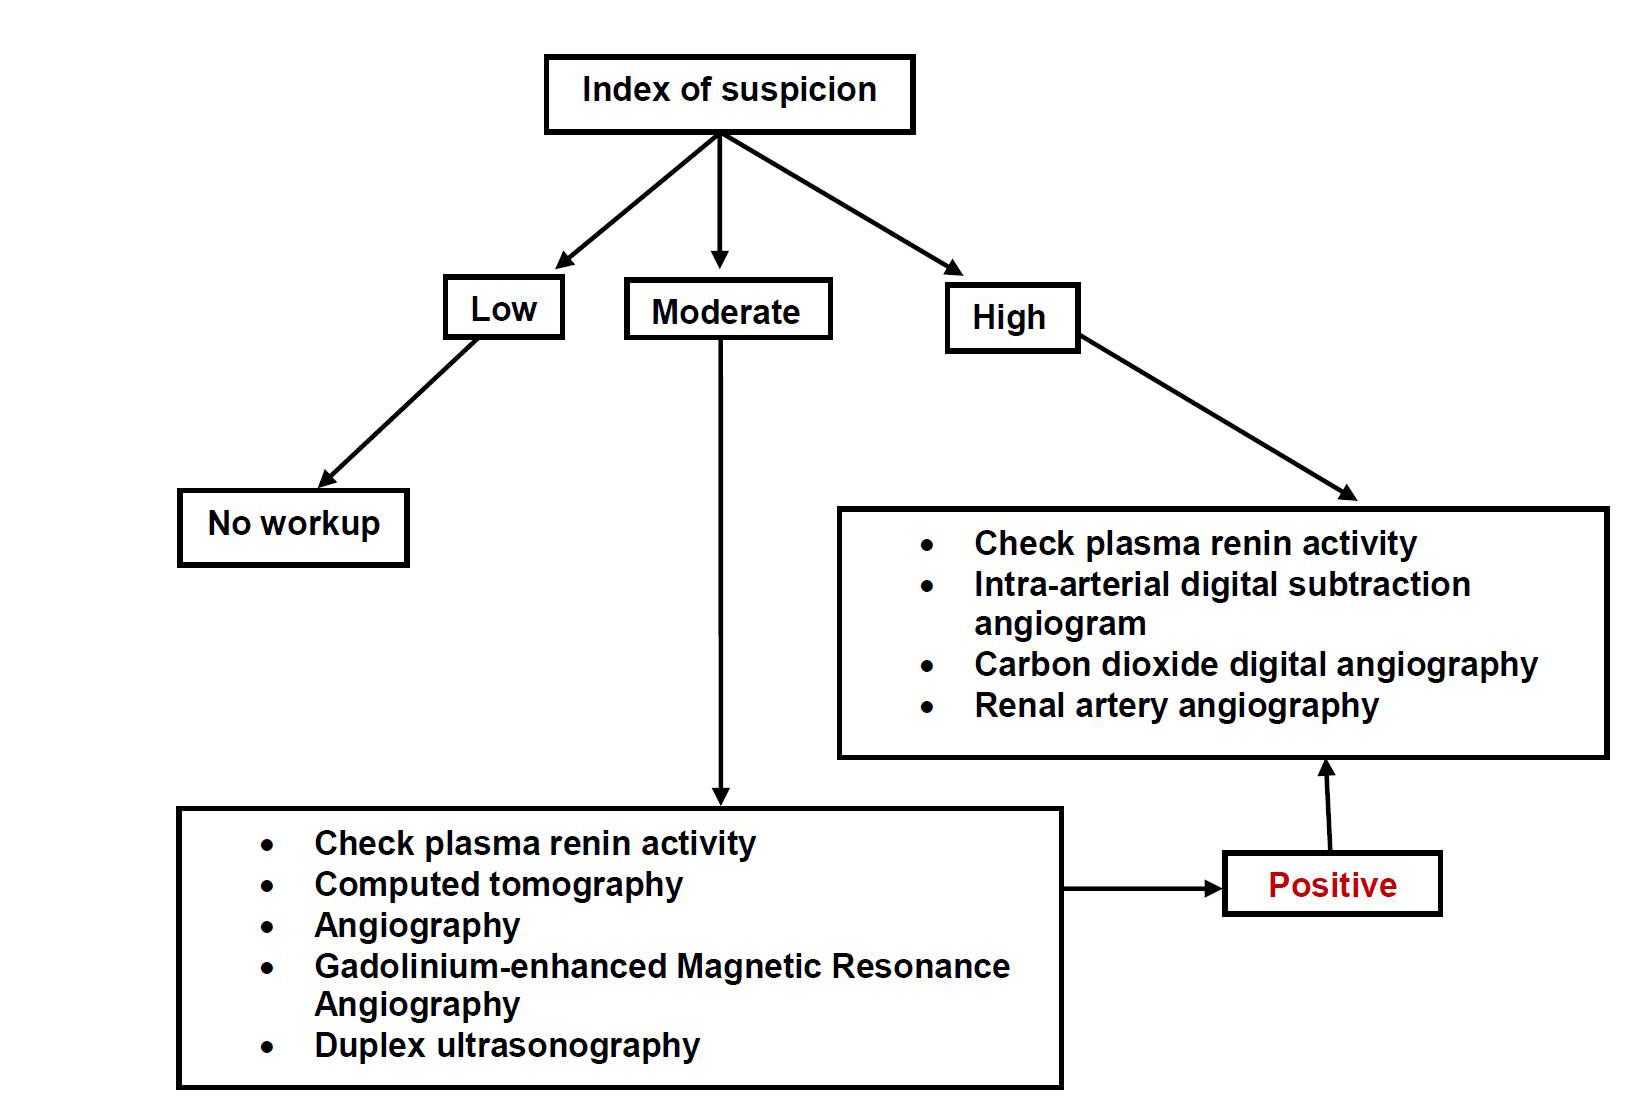 Figure 1. Flow chart for the diagnostic work-up of RVH.